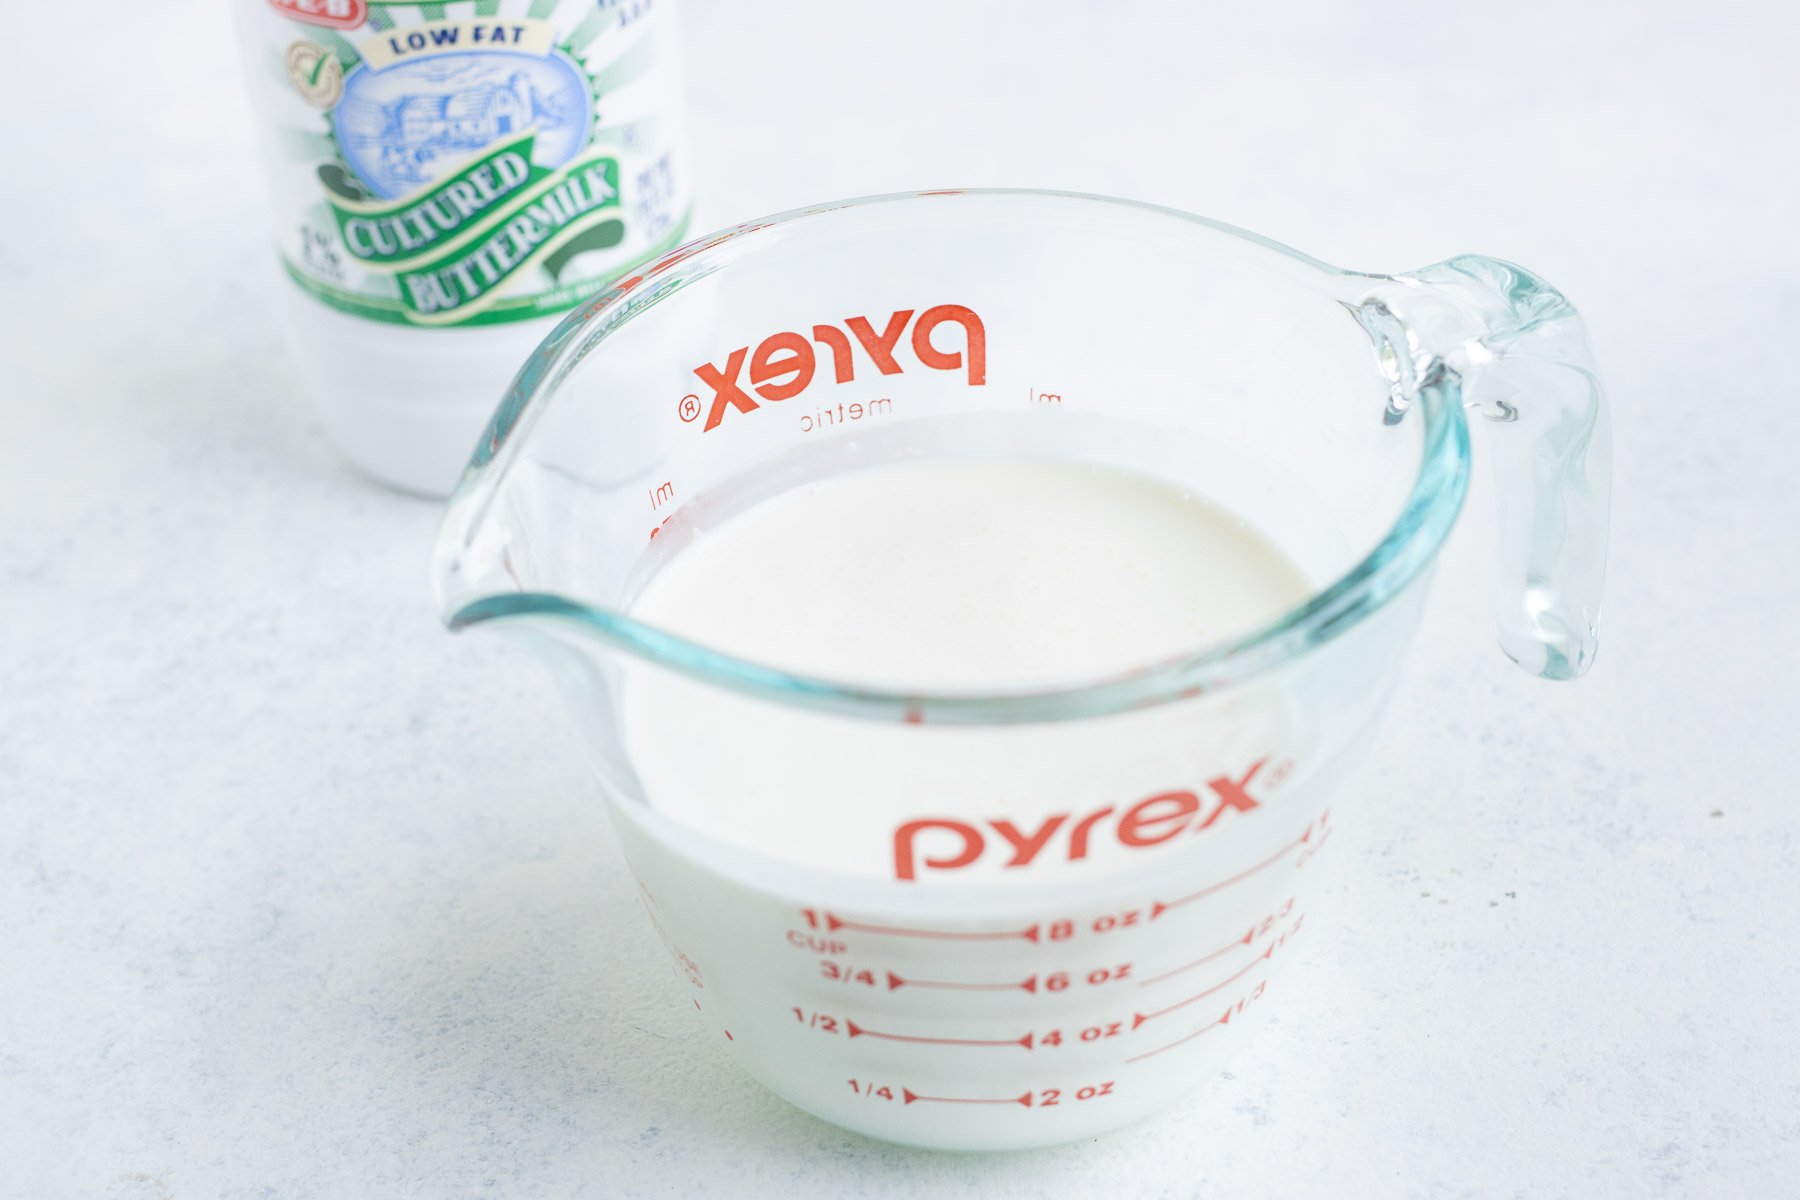 Buttermilk poured into a glass measuring cup with the original buttermilk container in the background.